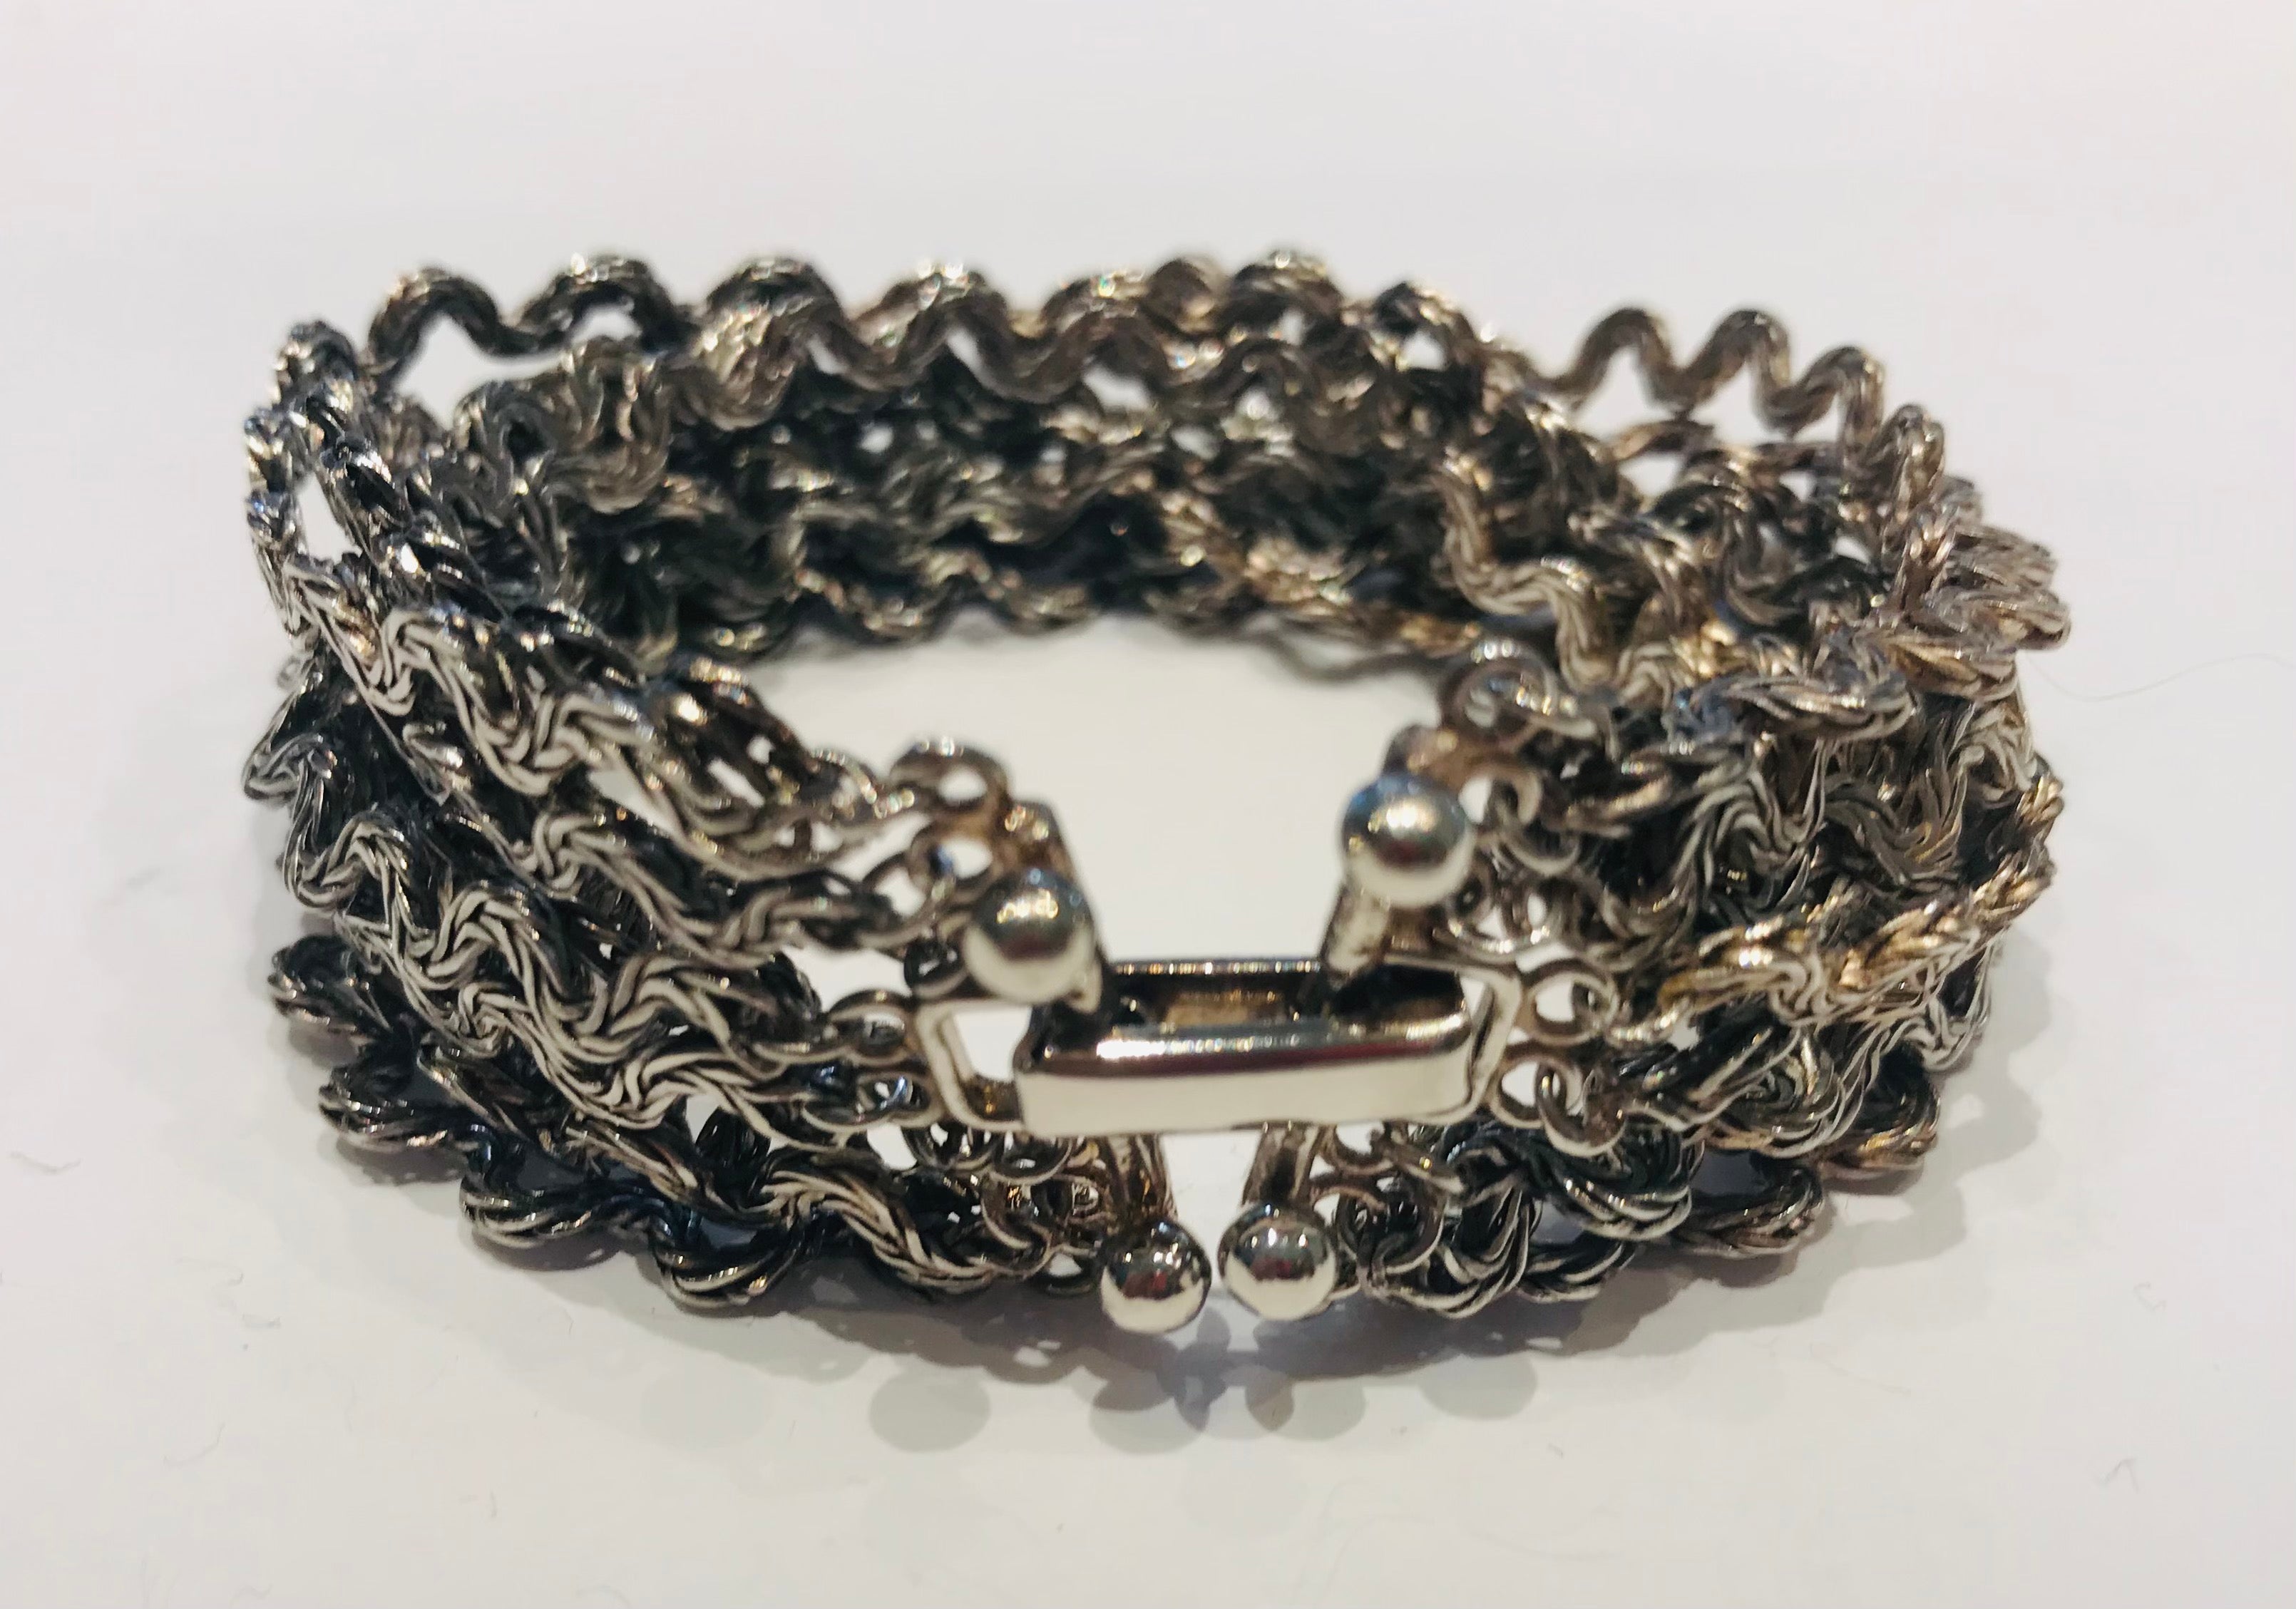 WOUTERS&HENDRIX silverplated bracelet 12 chains